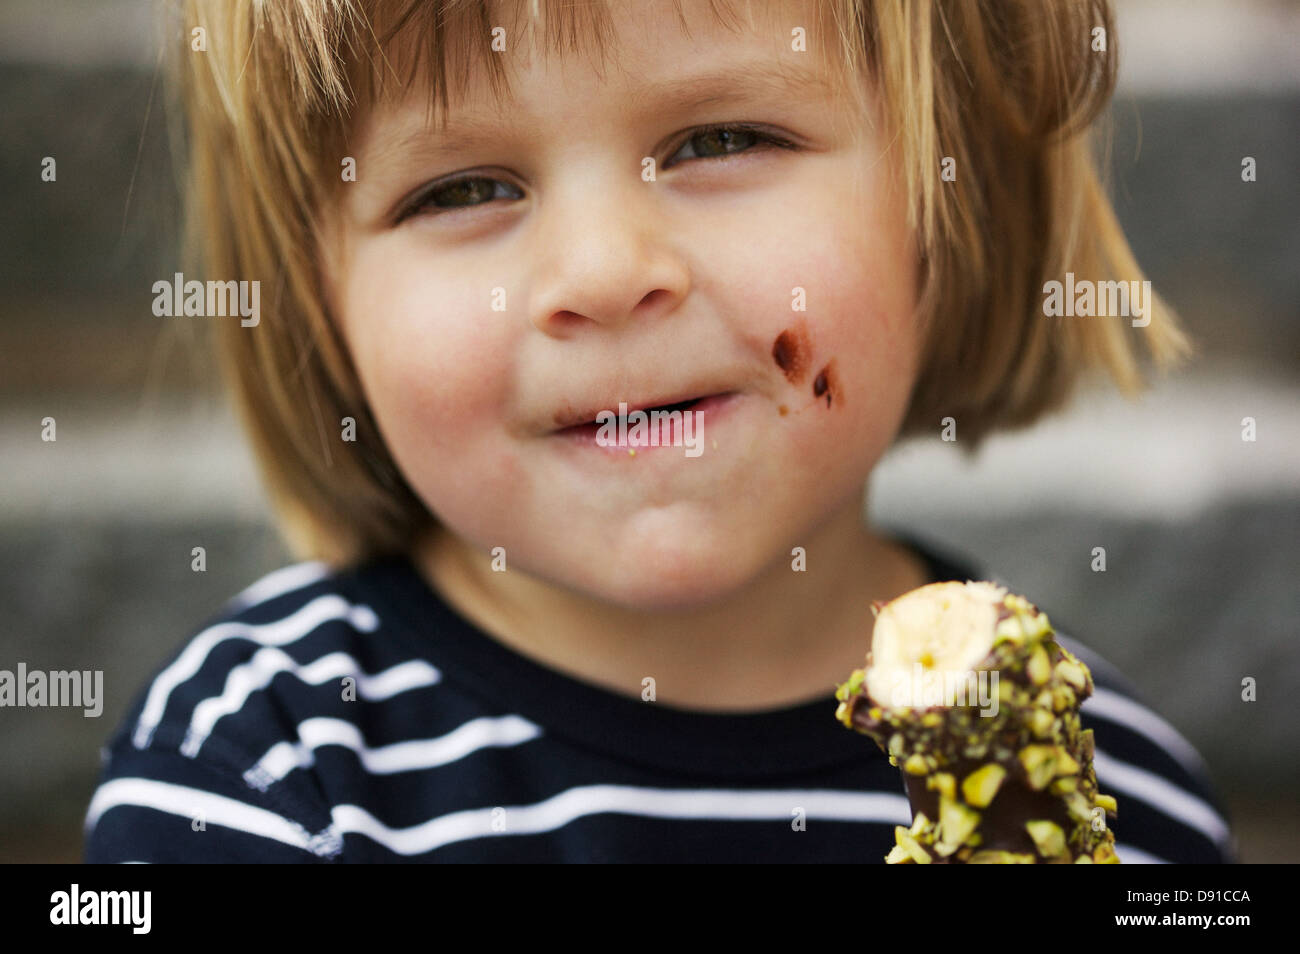 Boy eating a banana dipped in chocolate, Sweden. Stock Photo